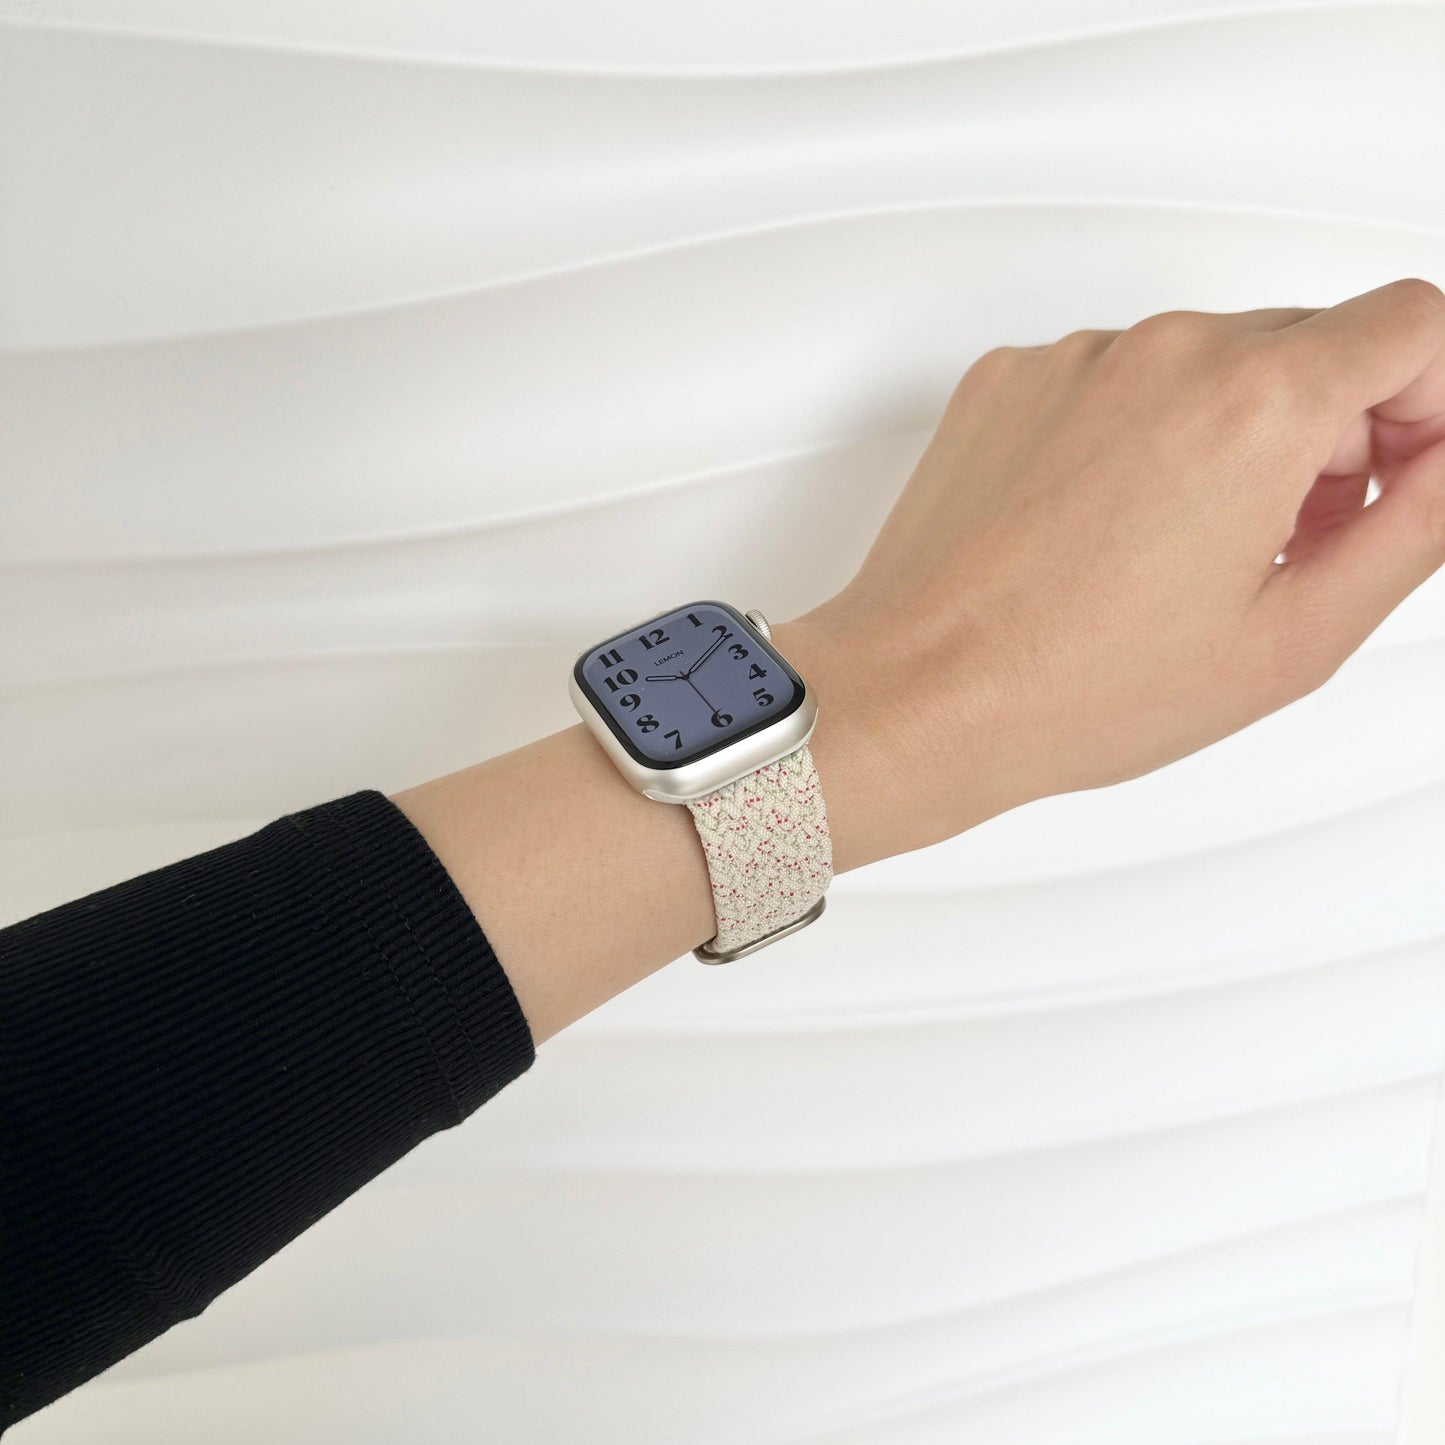 Cloud Nylon Apple Watch Band - Spotted Stralight